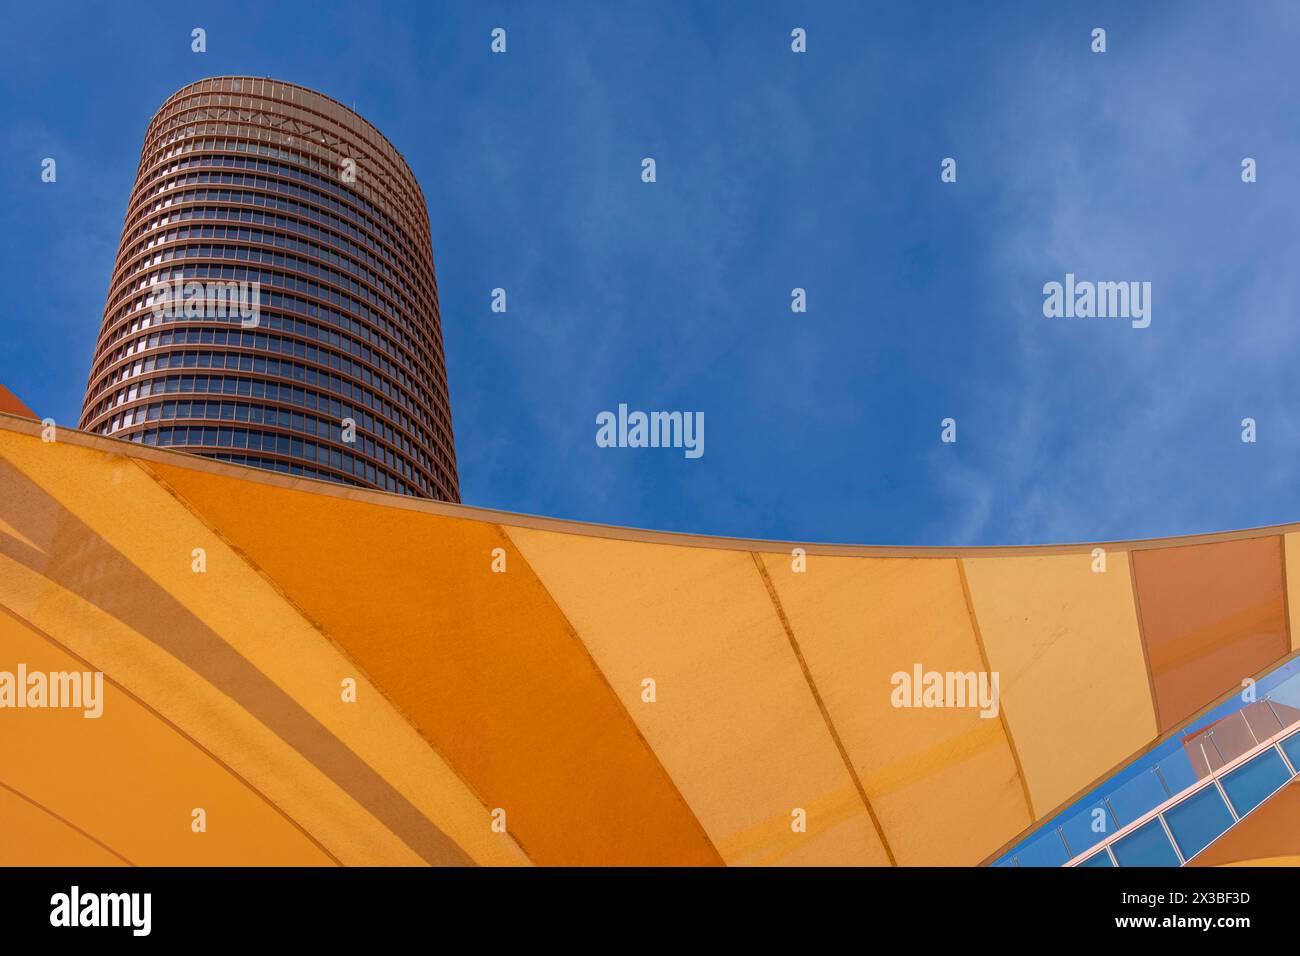 Modern skyscraper with orange accents viewed from below against a clear blue sky, Torre Sevilla, Seville, Andalusia, Spain, Europe Stock Photo